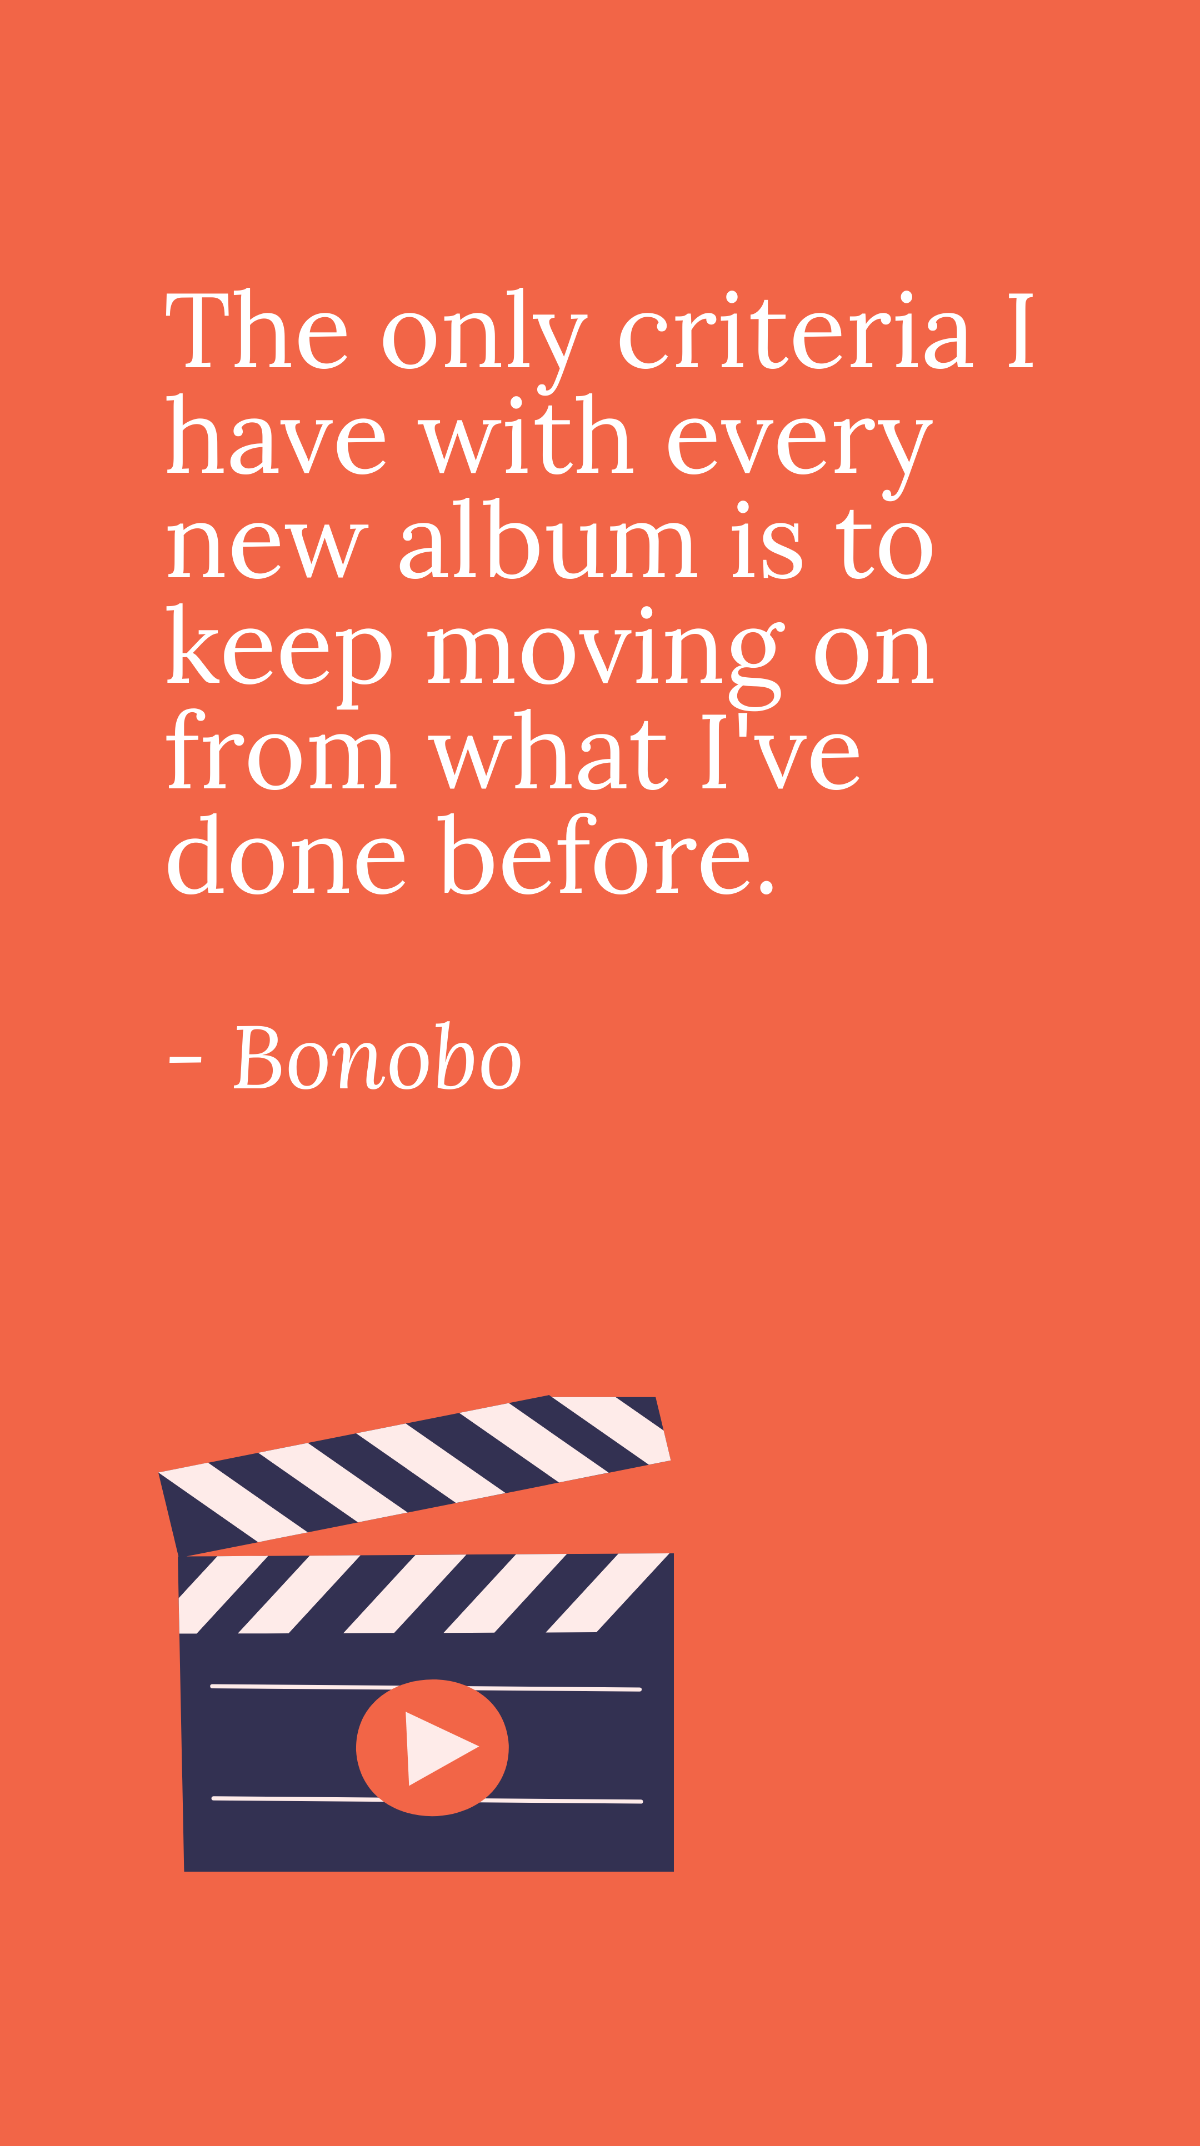 Bonobo - The only criteria I have with every new album is to keep moving on from what I've done before. Template